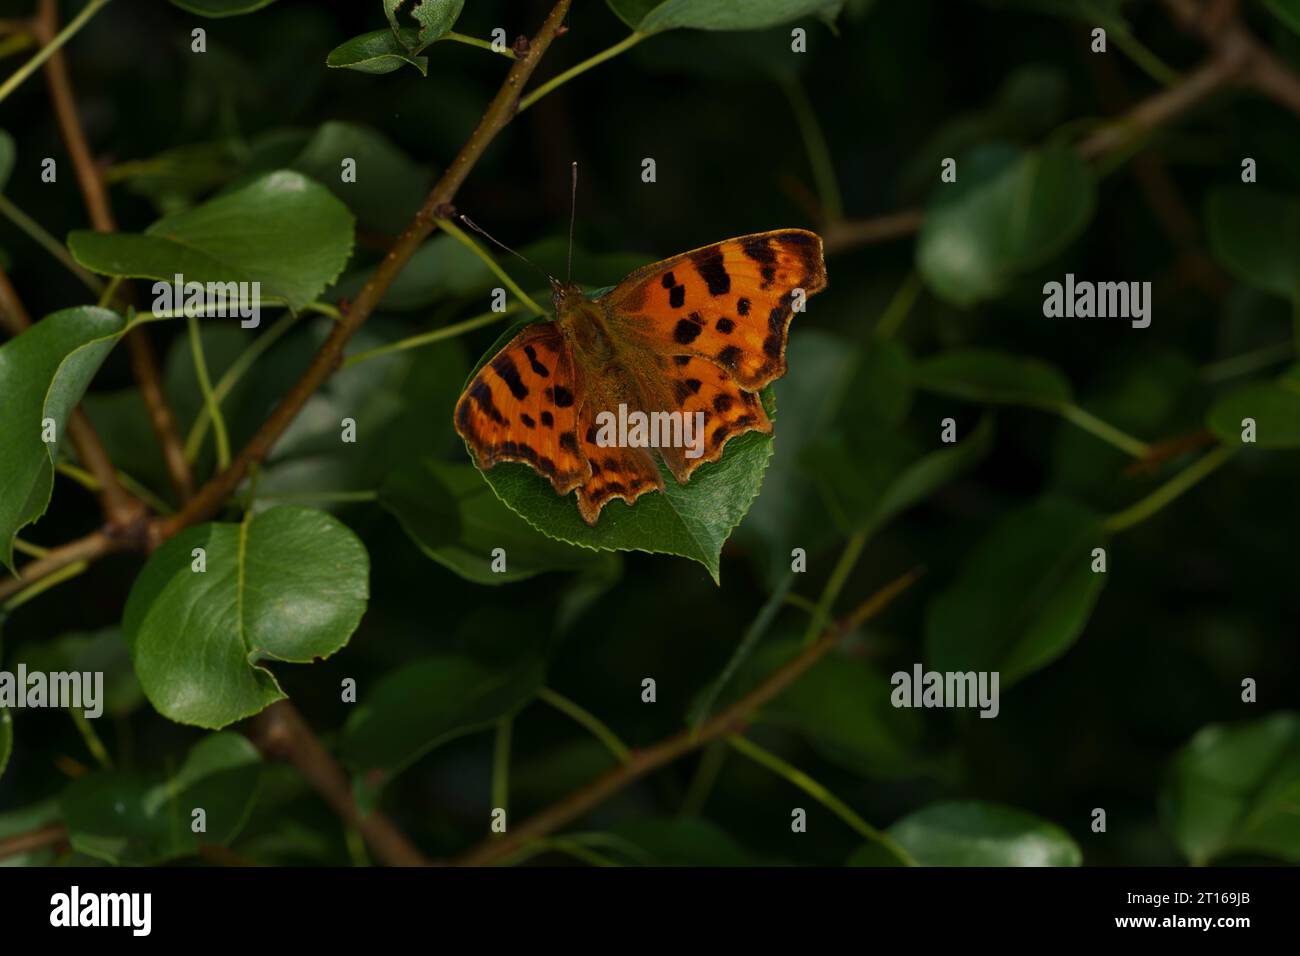 Polygonia c-album Family Nymphalidae Genus Polygonia Comma butterfly wild nature insect photography, picture, wallpaper Stock Photo